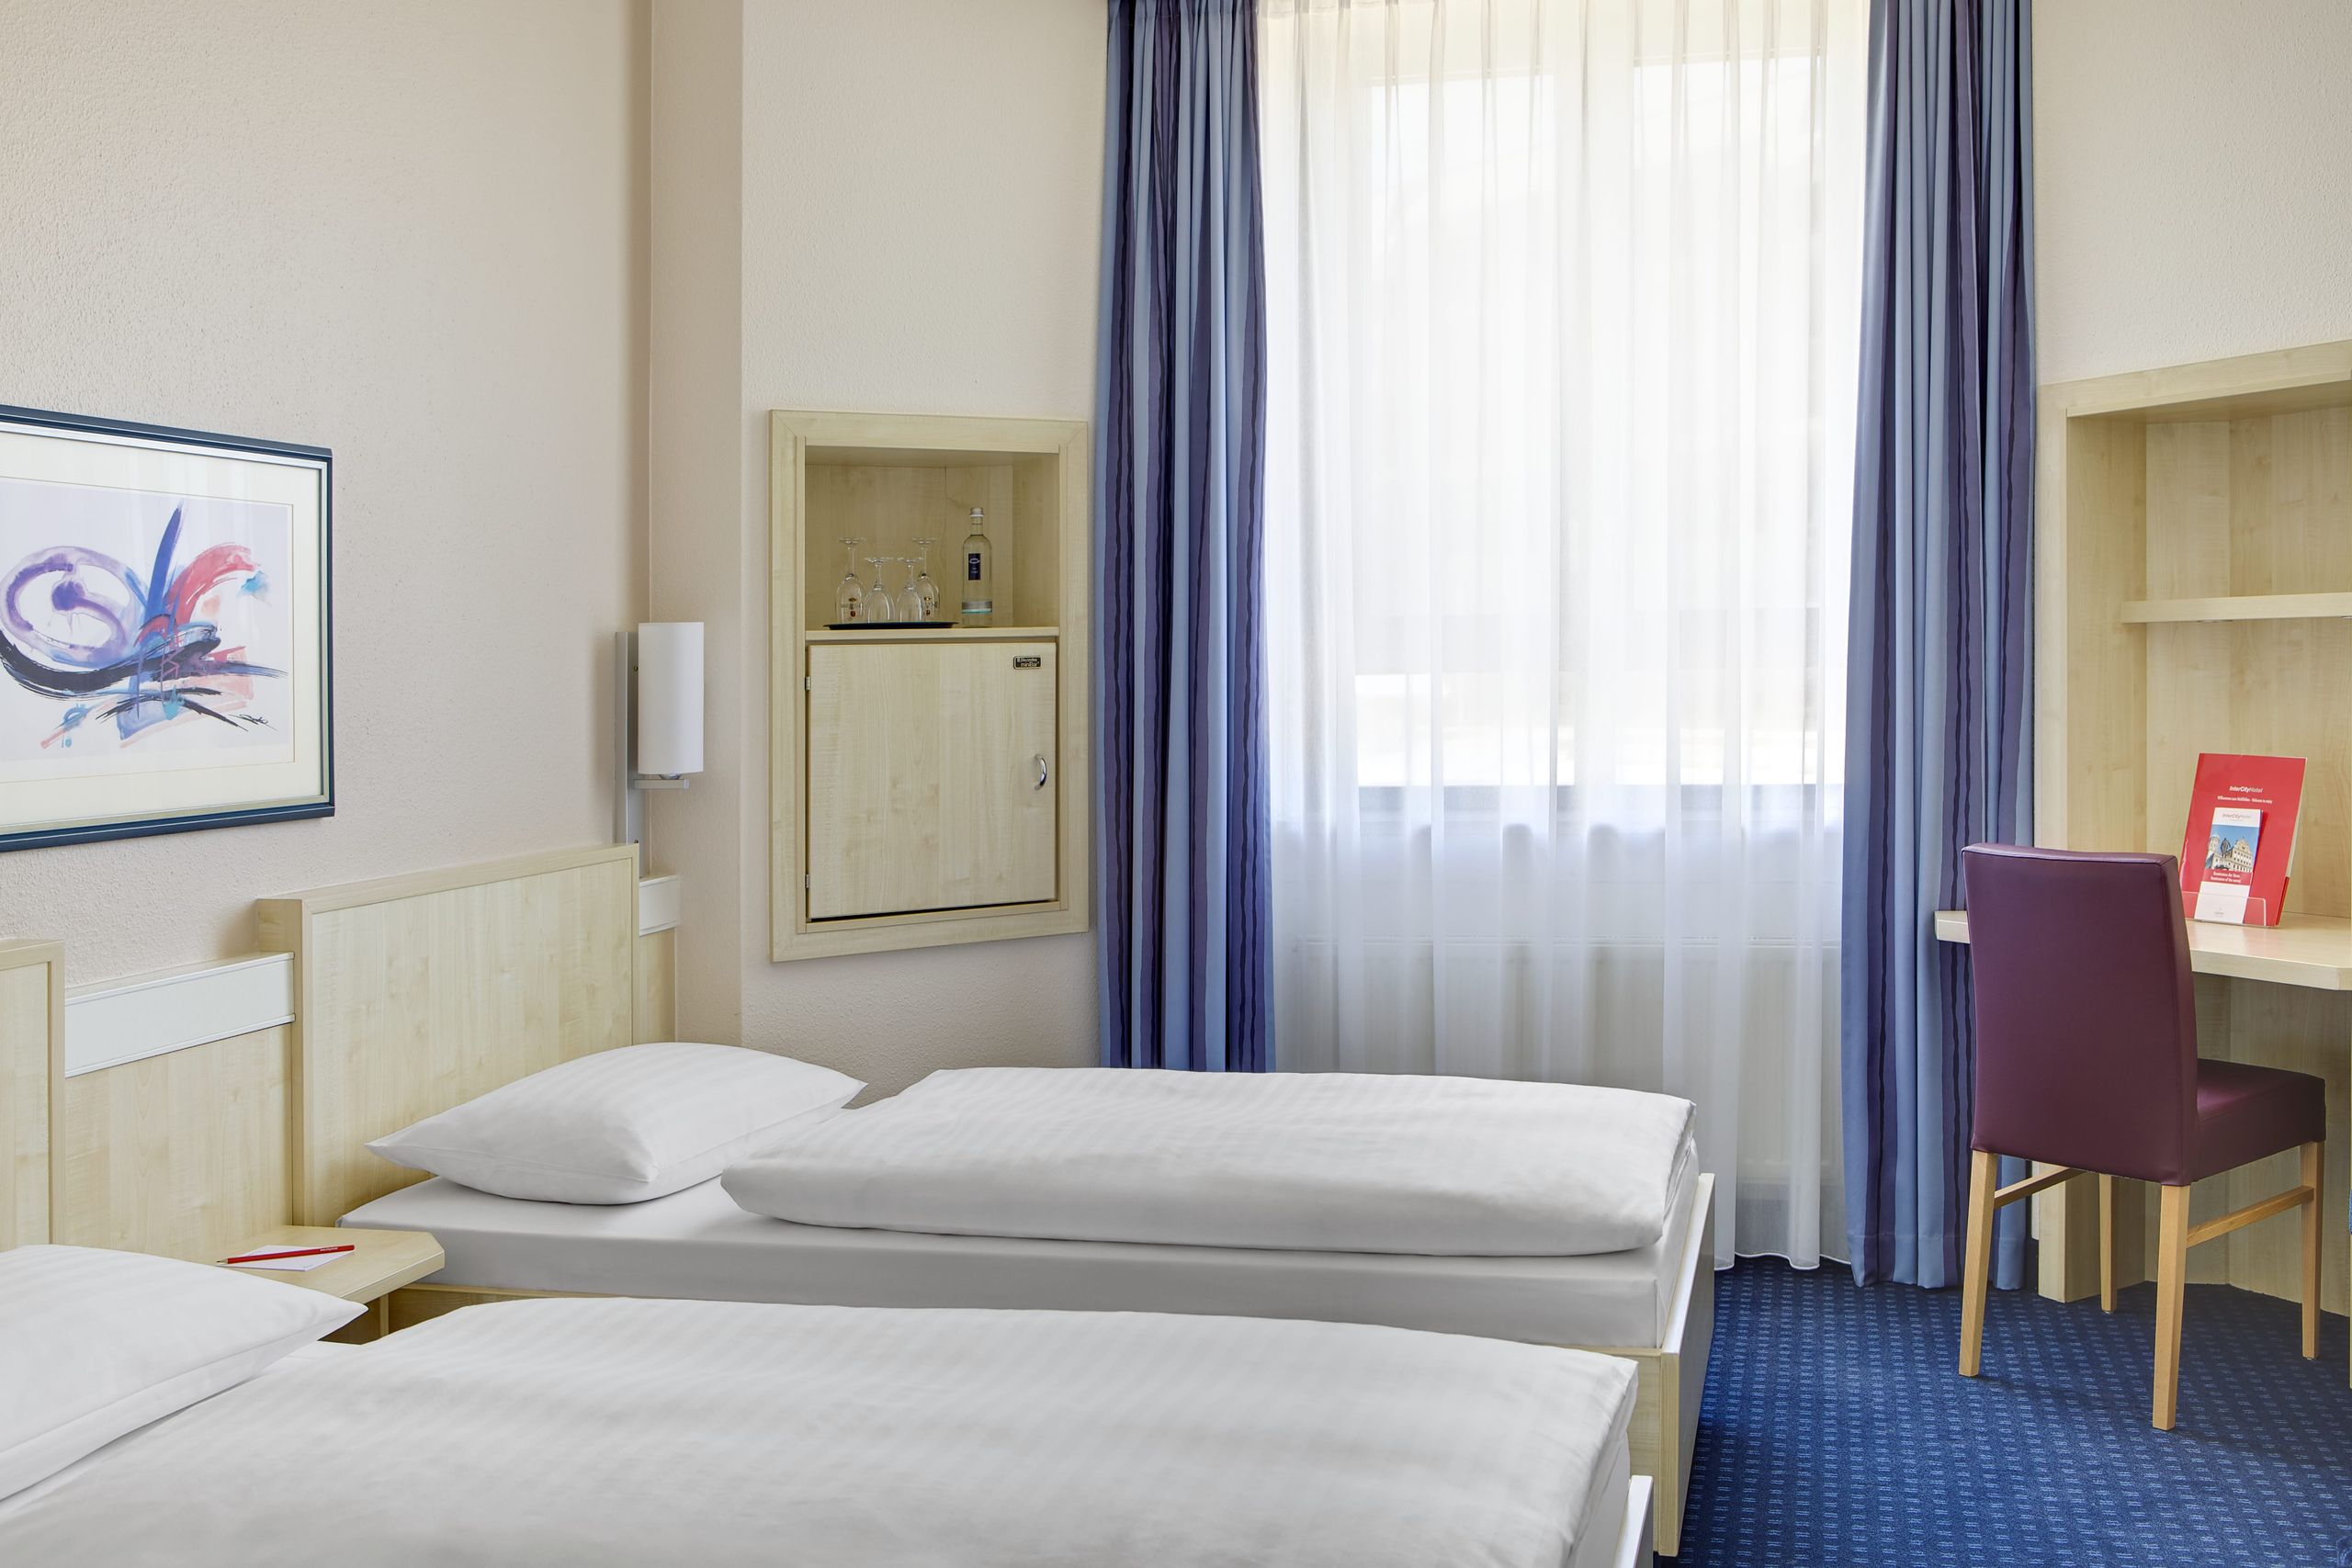 IntercityHotel Ulm - Business Plus room with separate beds